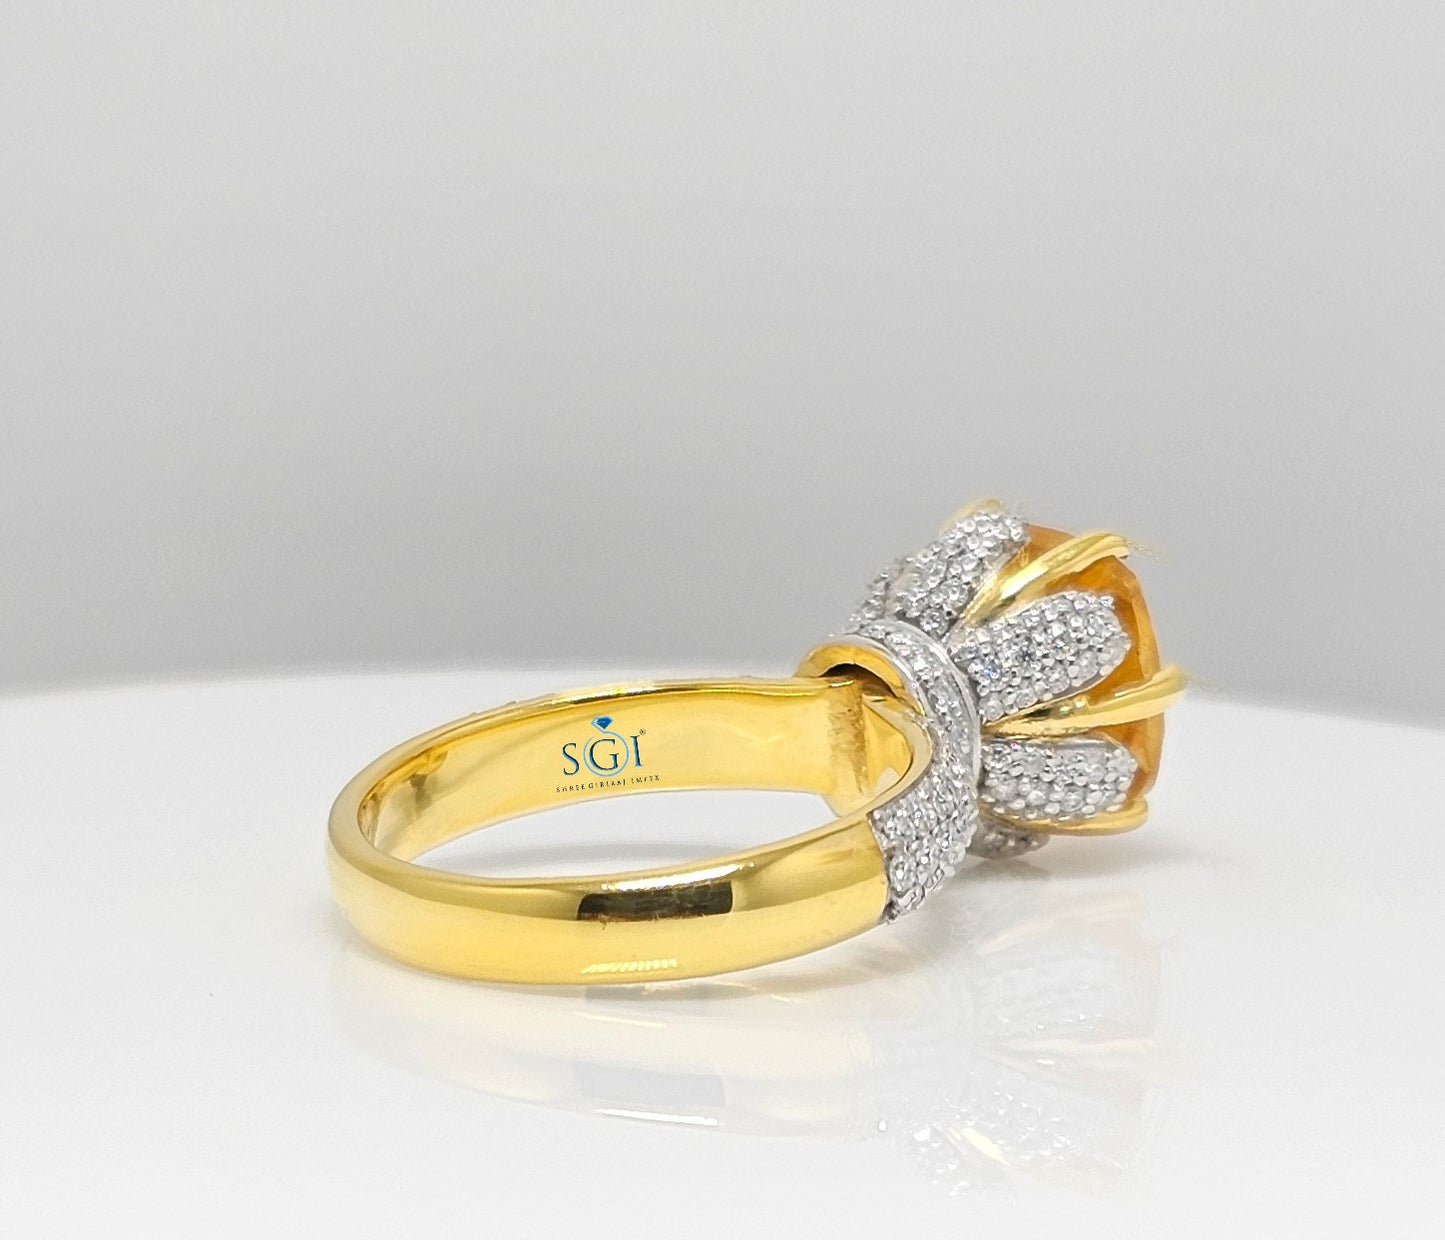 5ctw Moissanite Diamond Propose Ring With 14k Yellow Gold